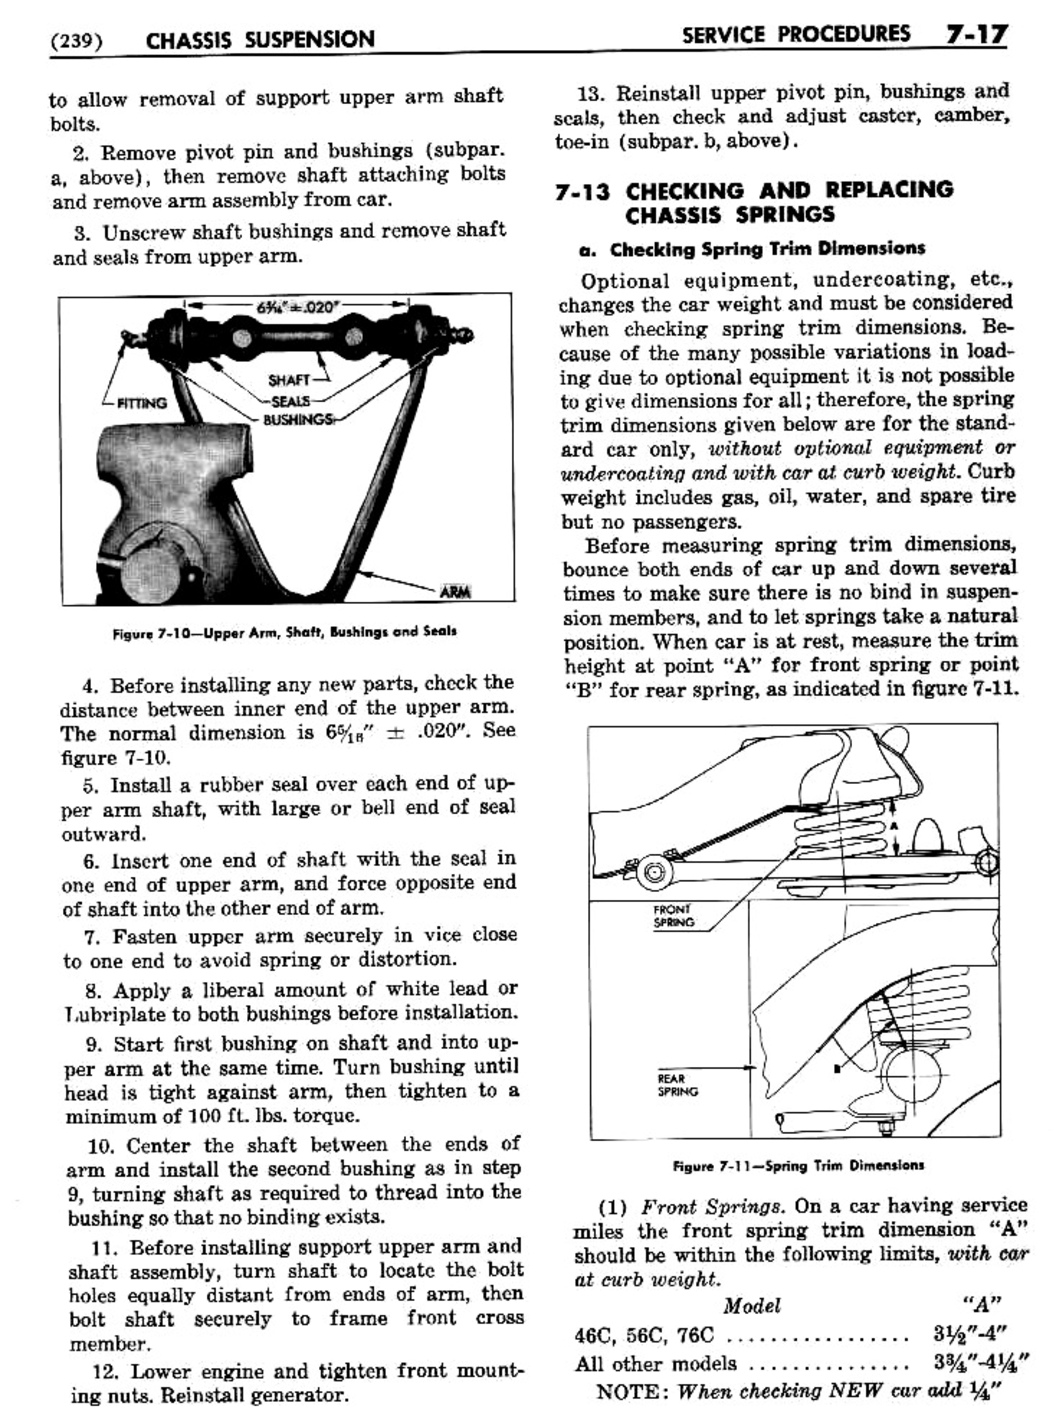 n_08 1955 Buick Shop Manual - Chassis Suspension-017-017.jpg